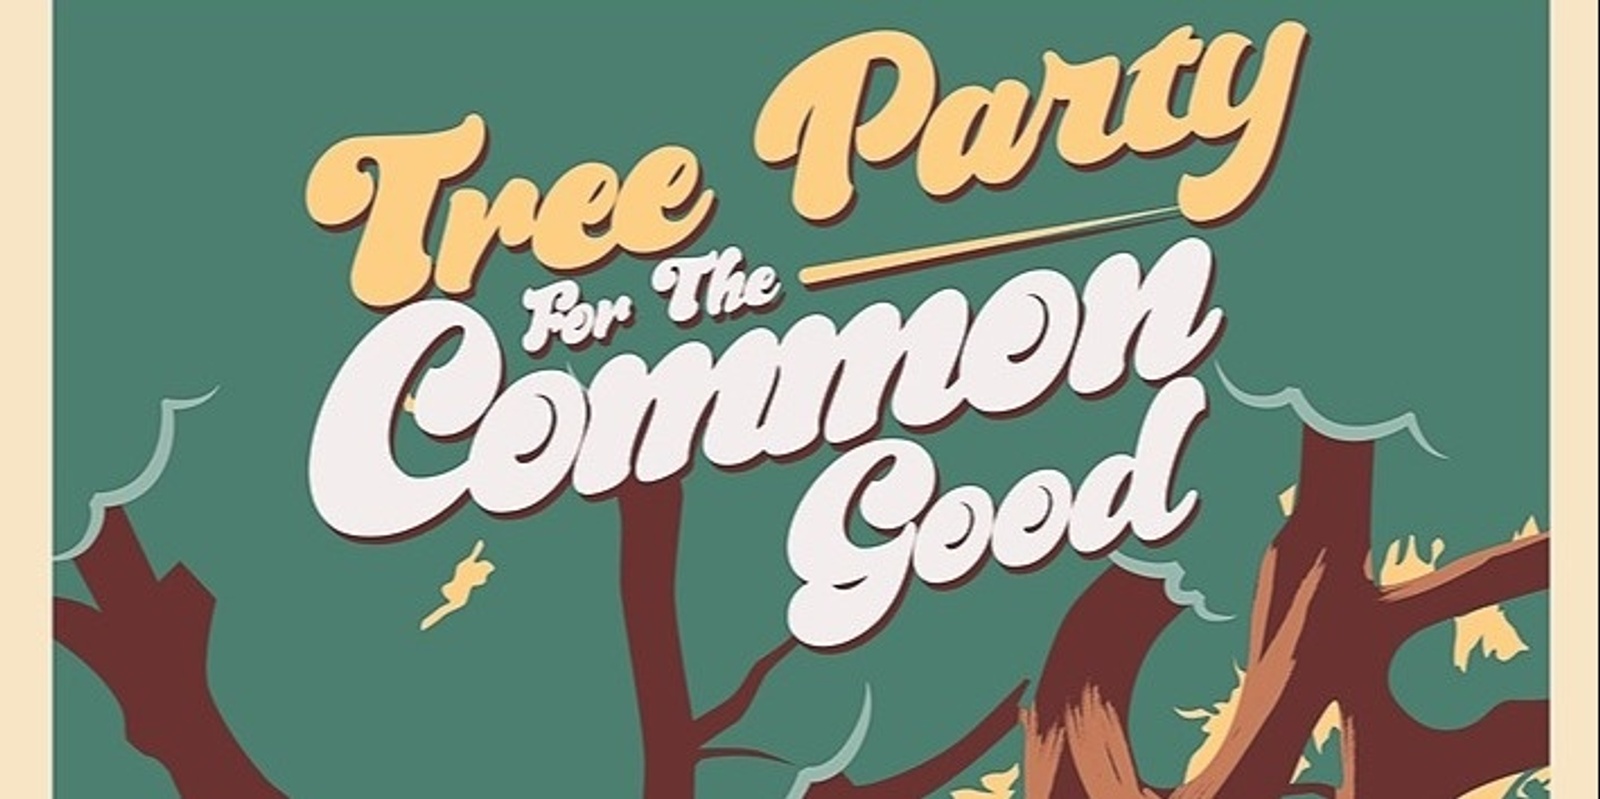 Tree Party for the Common Good